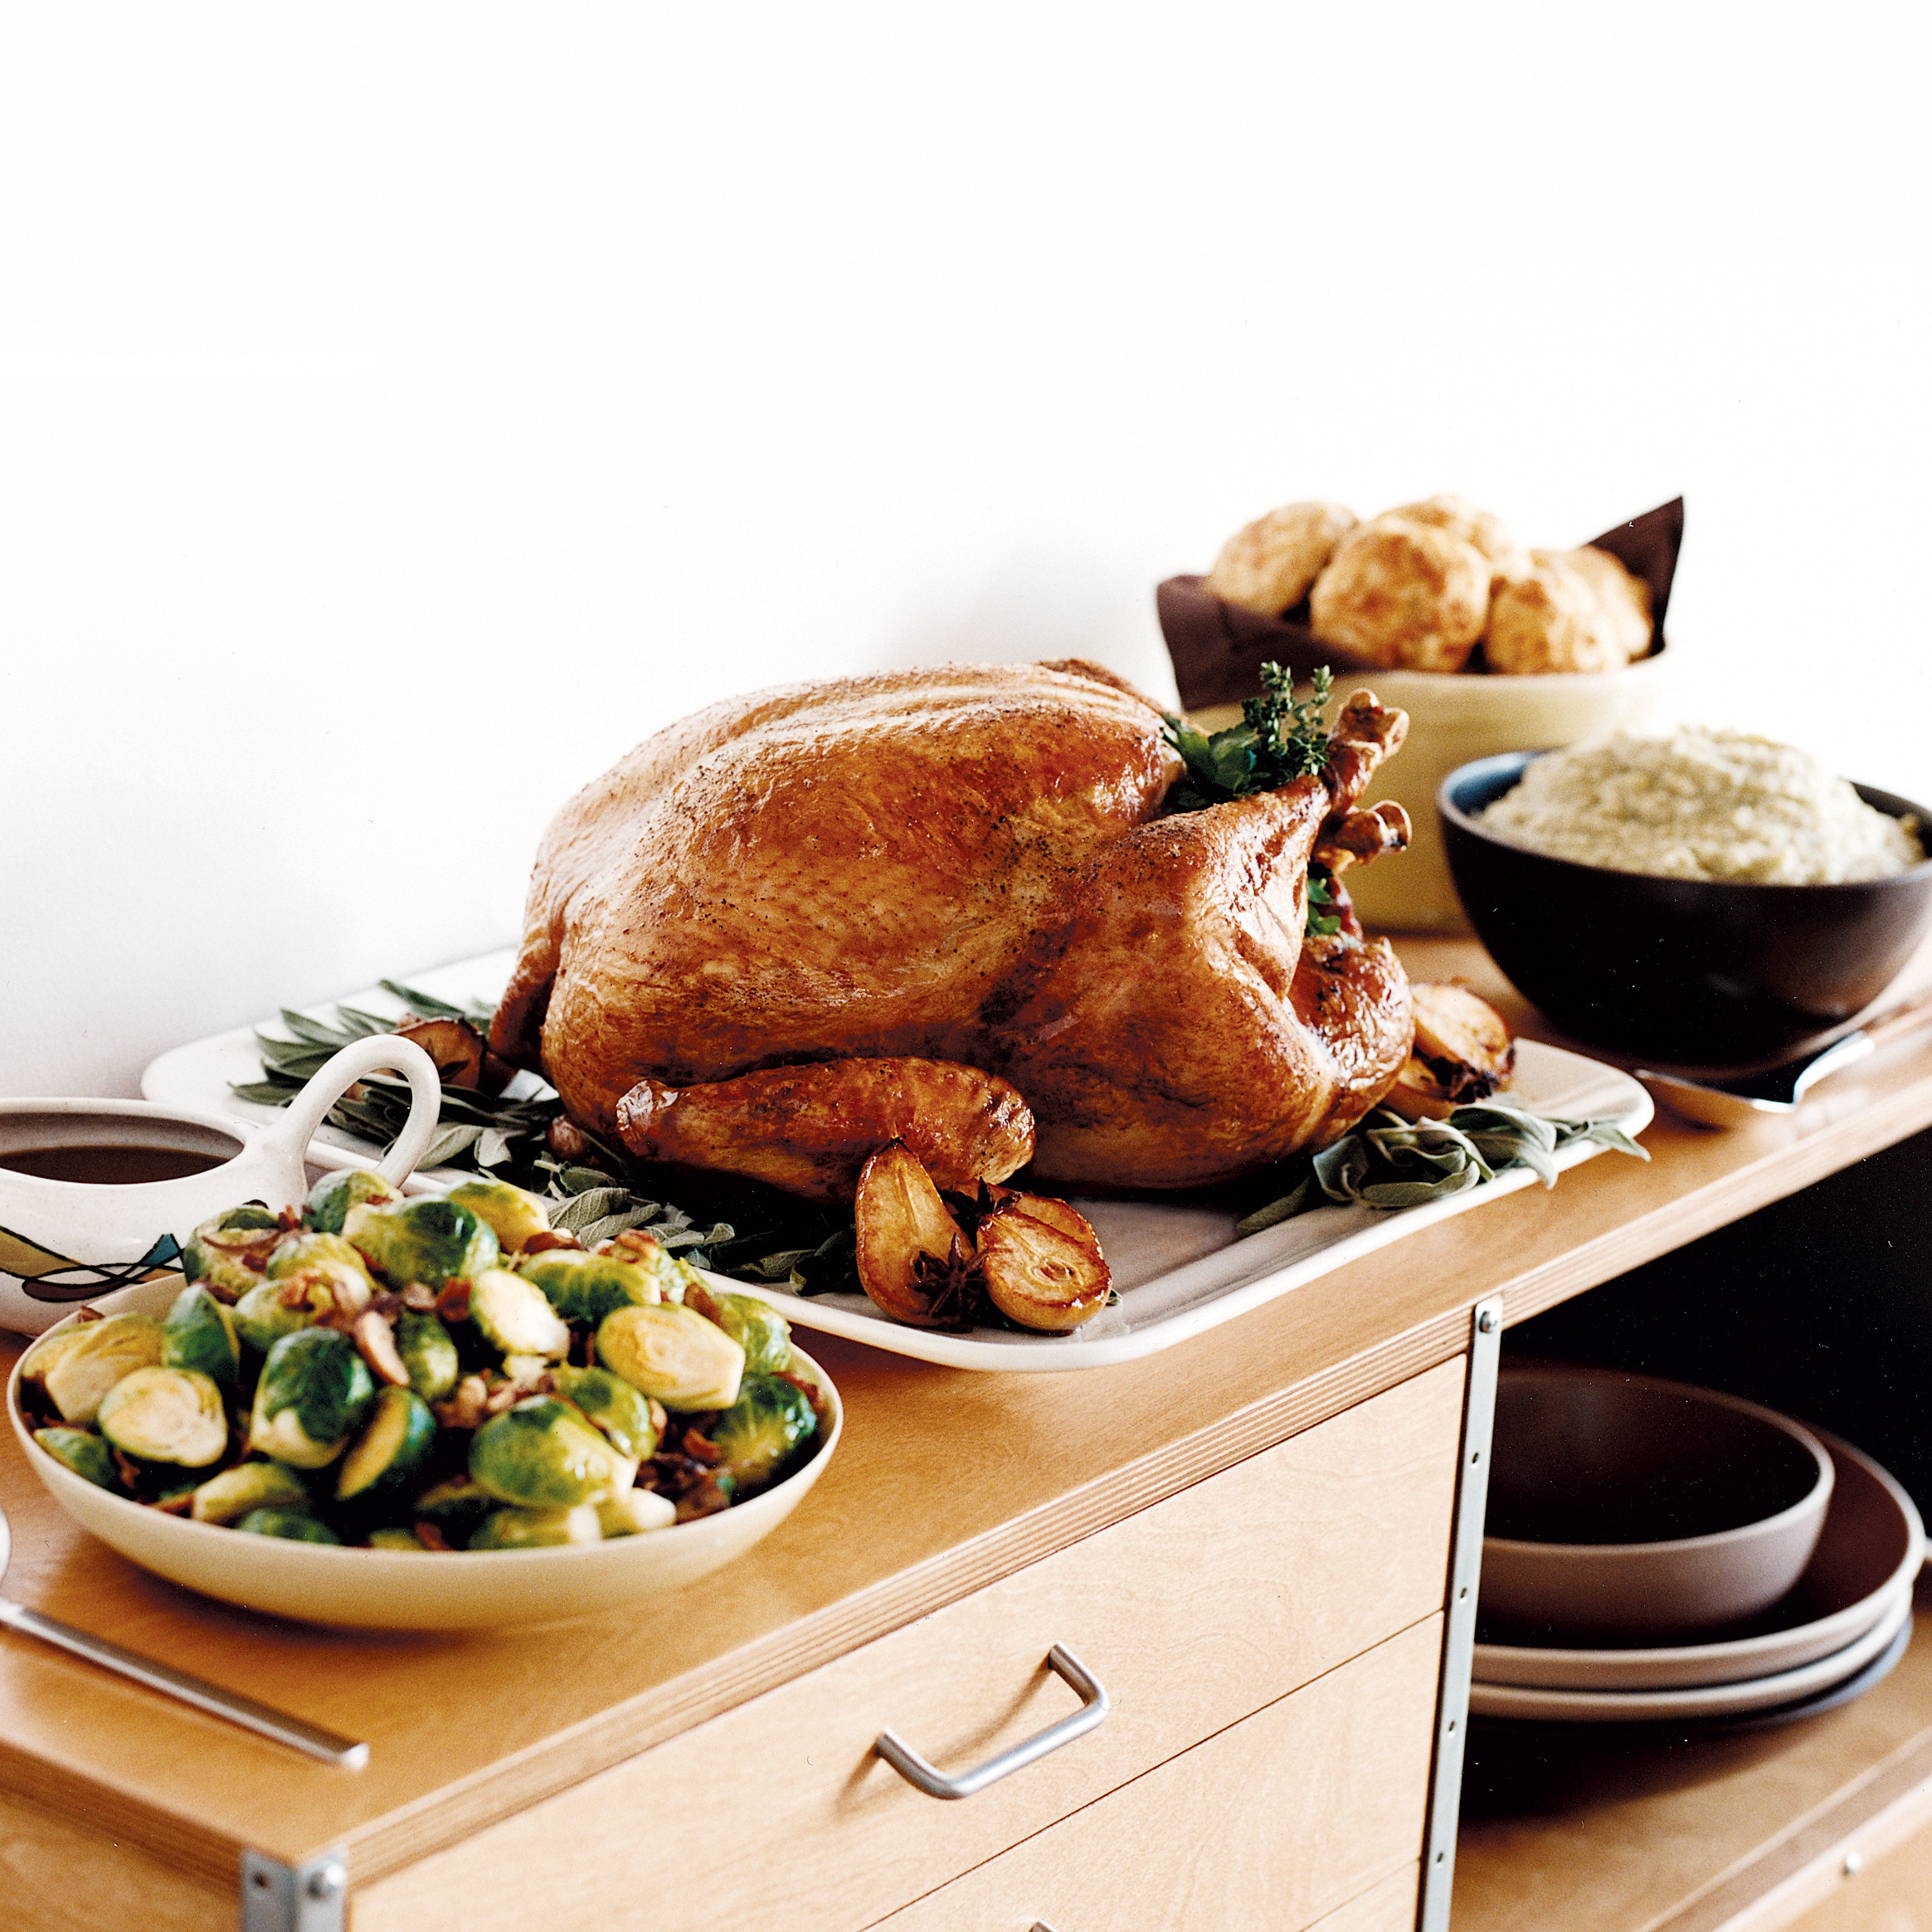 Gravy Thanksgiving Side Dishes
 Herb Roasted Turkey with Maple Gravy Recipe Lee Hefter